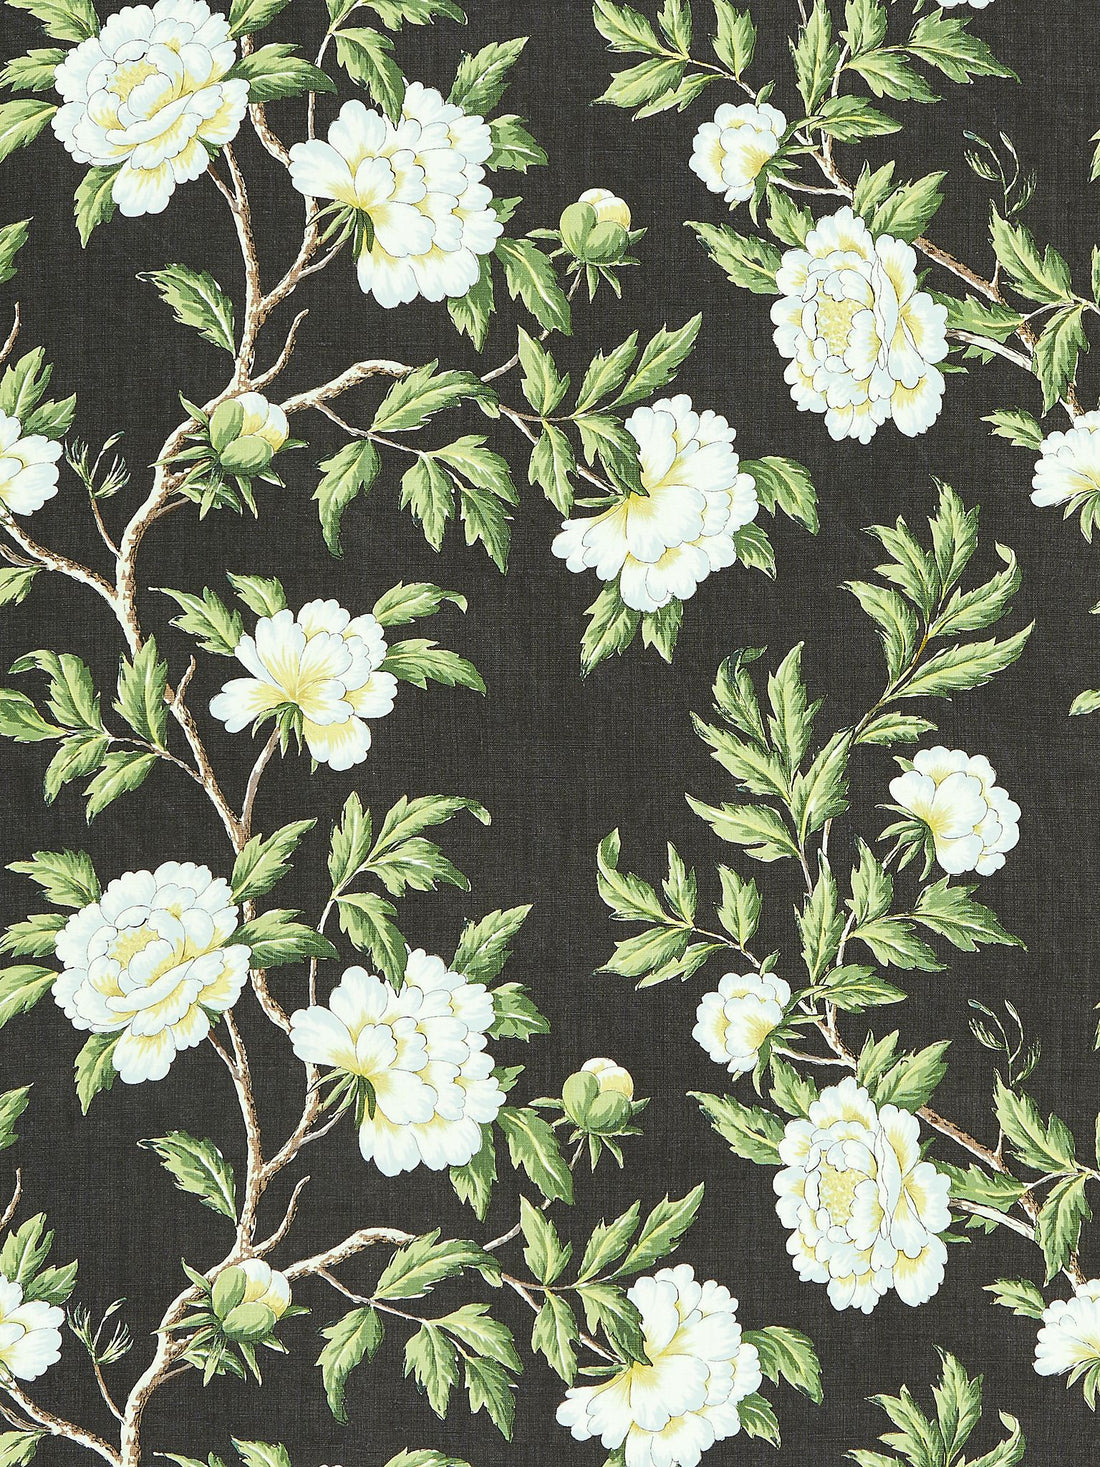 Peonia Linen Print fabric in onyx color - pattern number SC 000316616 - by Scalamandre in the Scalamandre Fabrics Book 1 collection